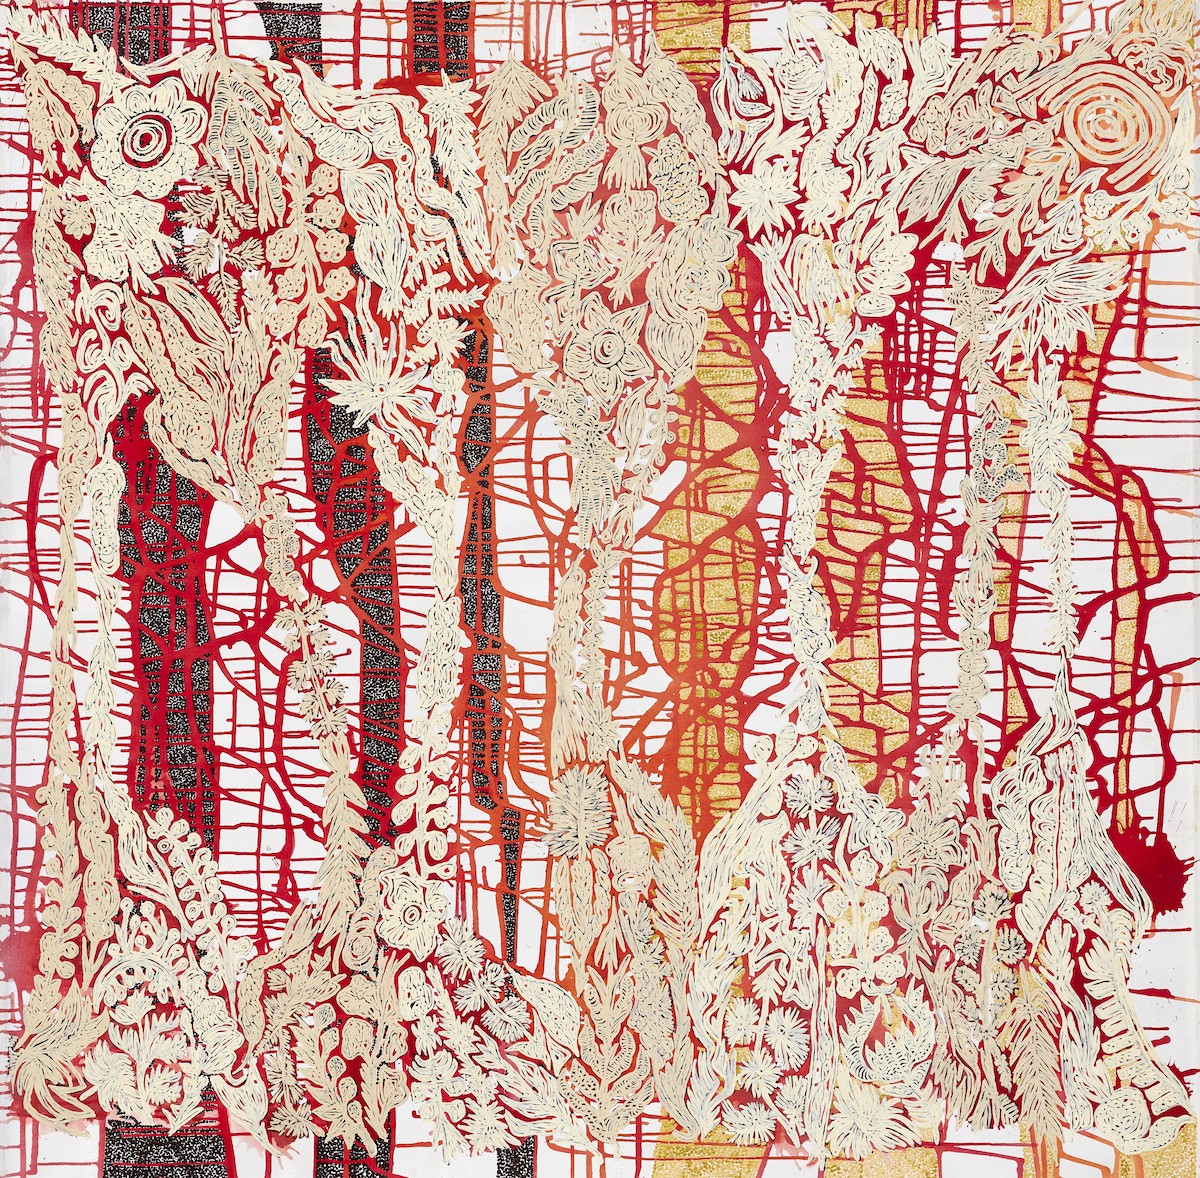 Abstract painting of layered drips, dits and botanical designs in orange, pale yellow, red and white.